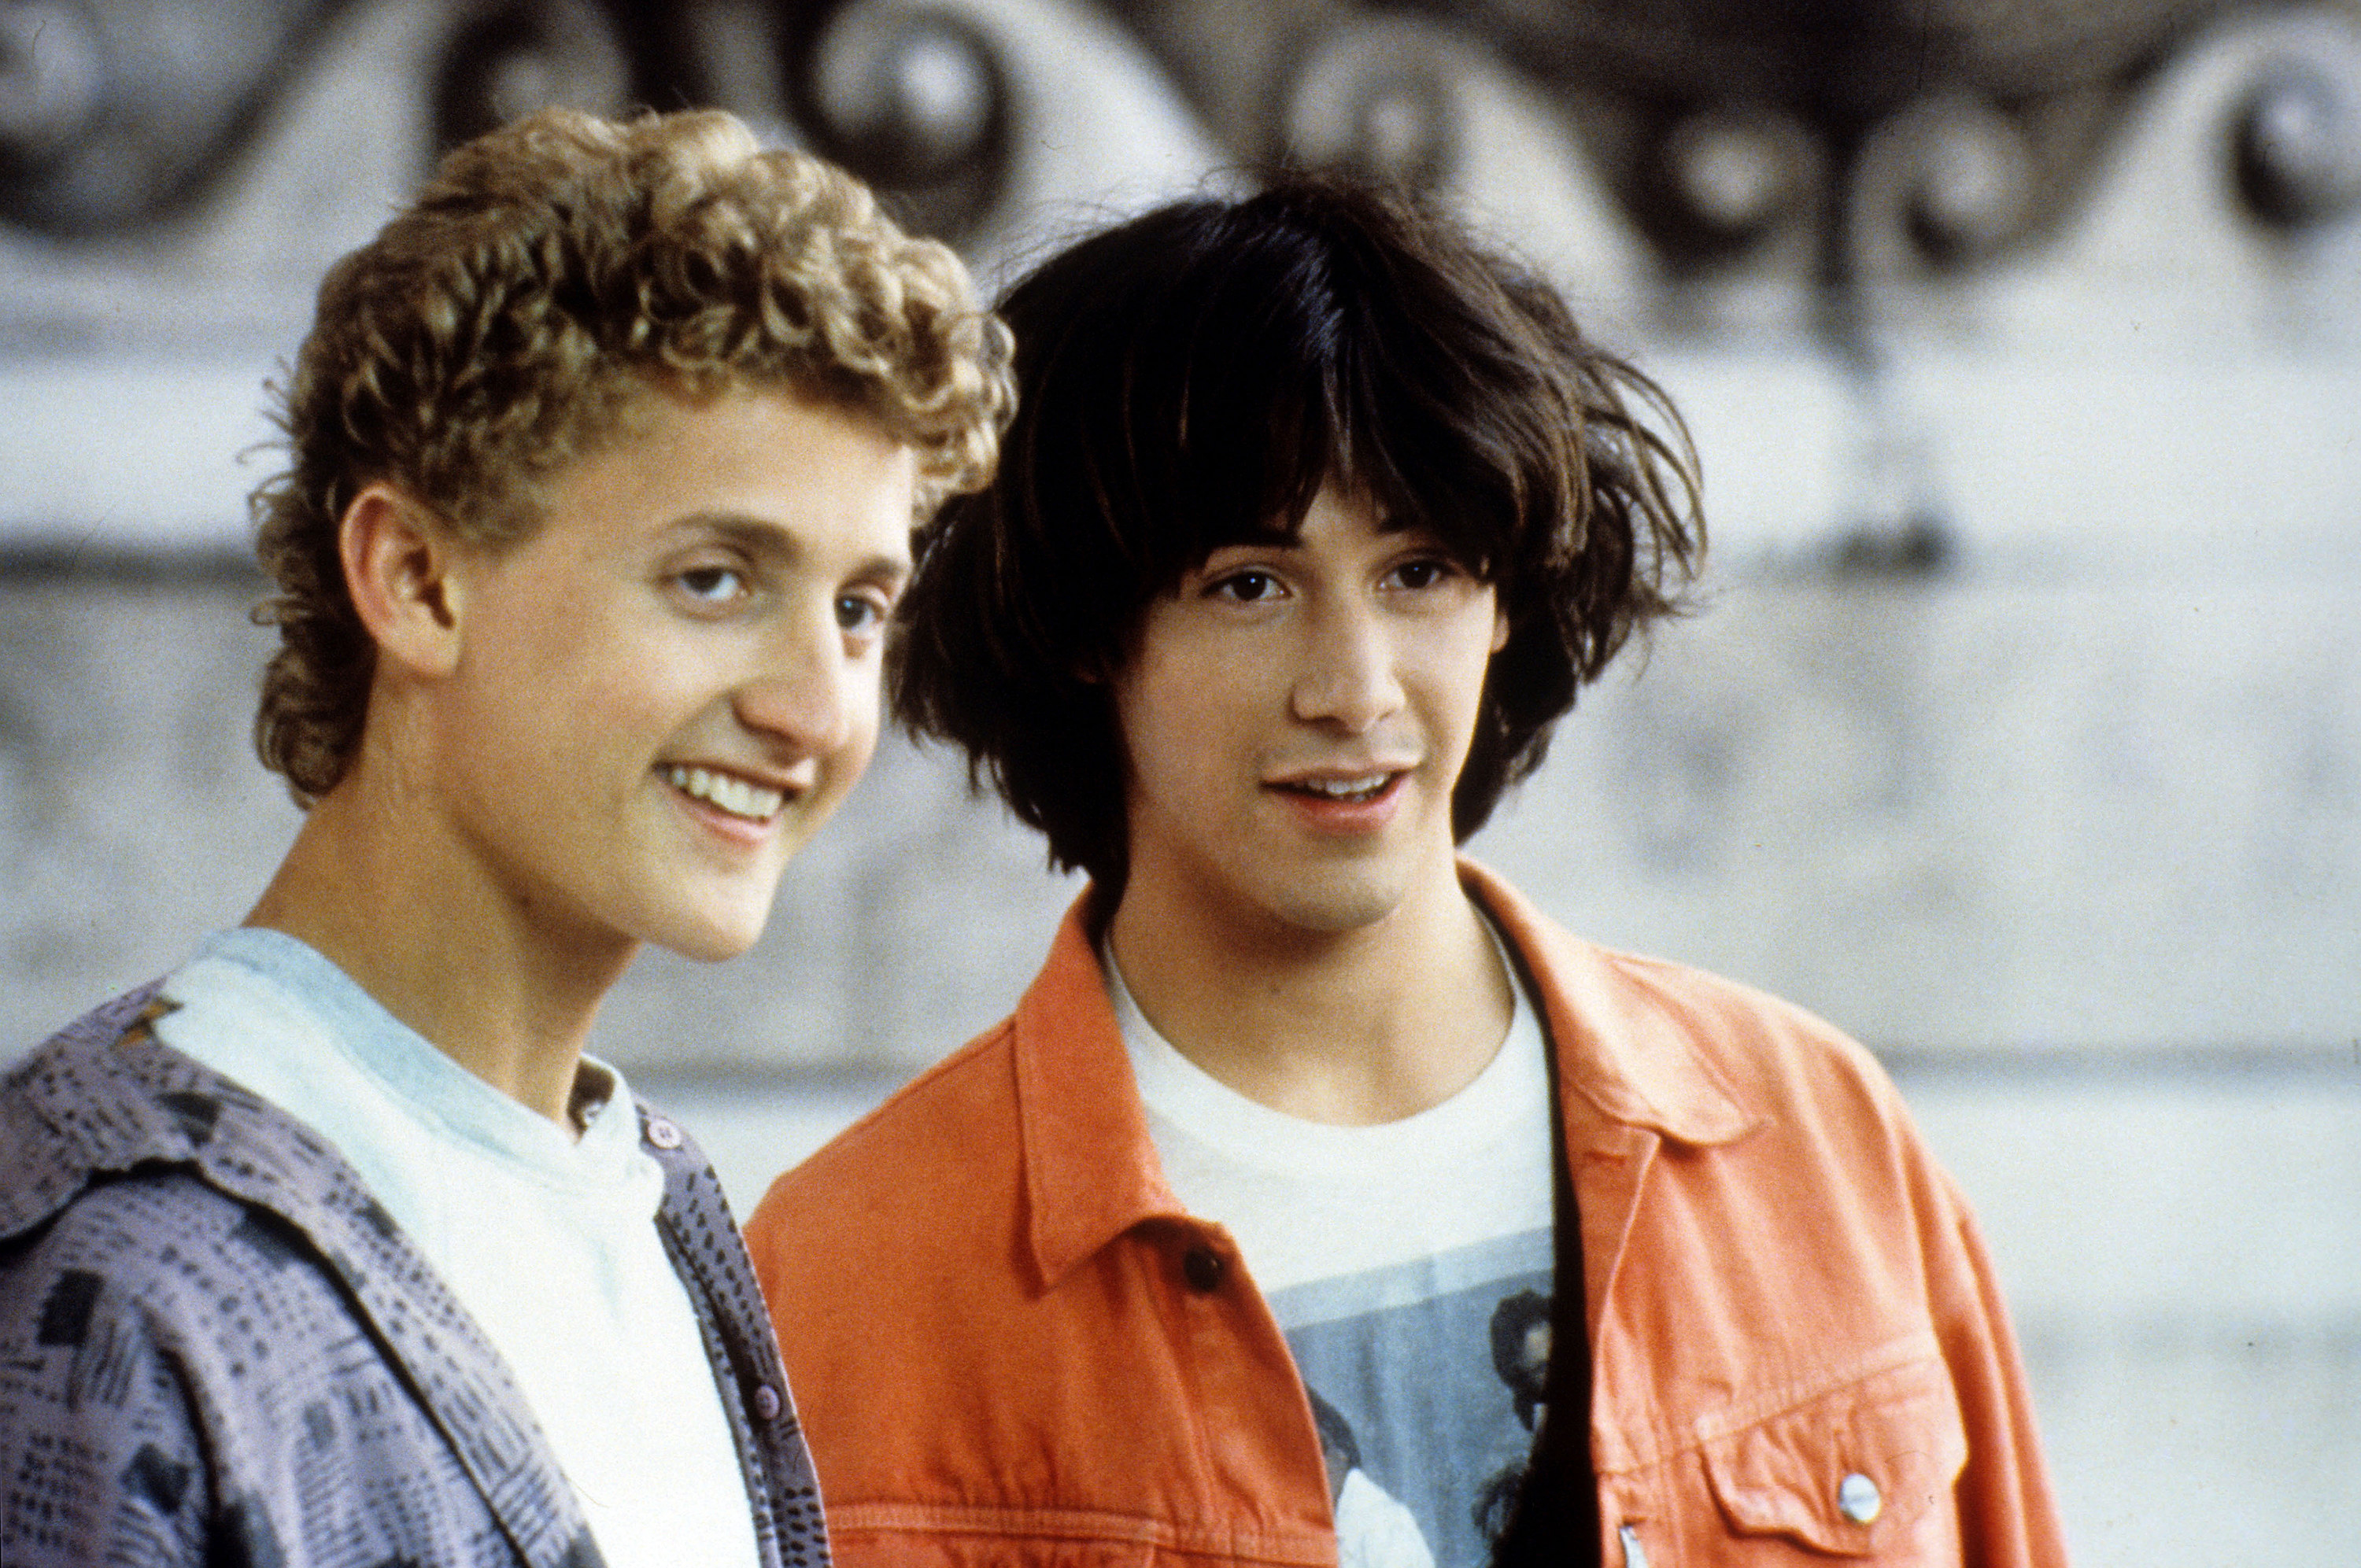 Alex WInter and Keanu Reeves smiling